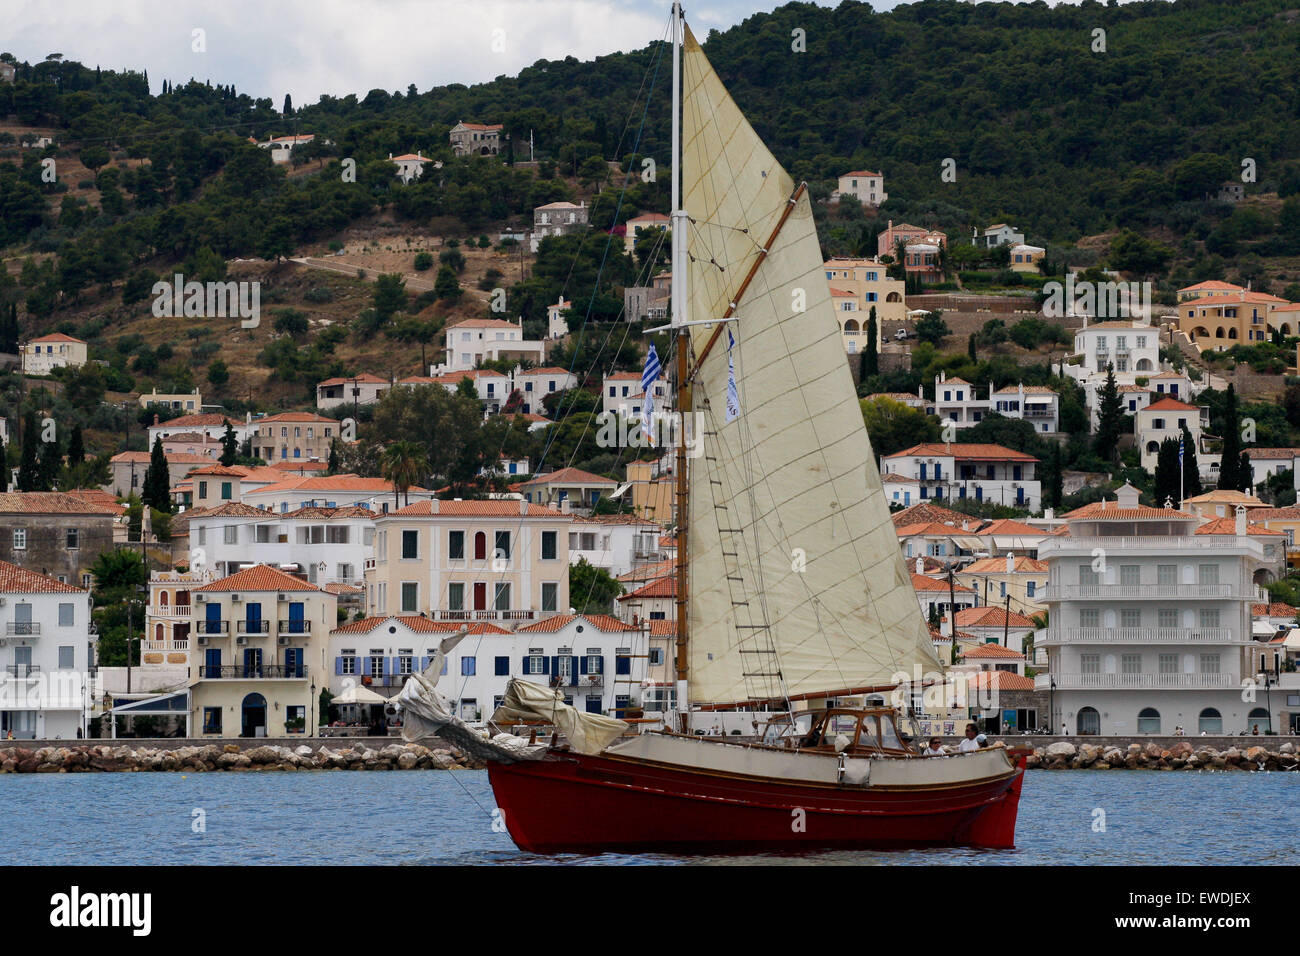 The inaugural event of the Spetses Classic Yacht Race 2011 was held in September 2011 in the picturesque island of Spetses, only Stock Photo